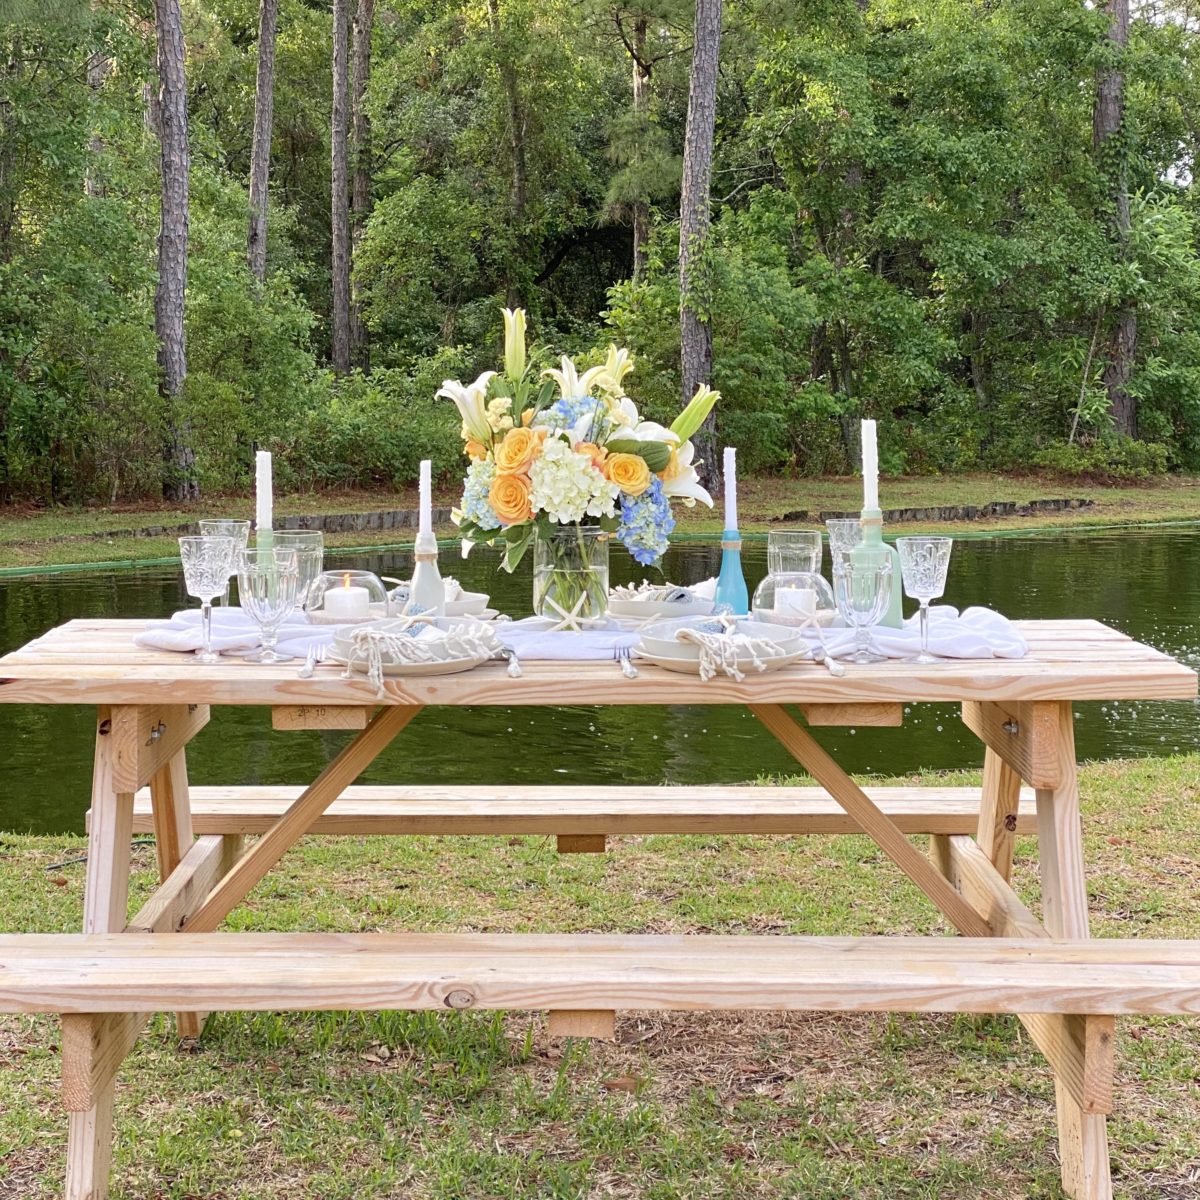 Simple summer tablescape on a picnic table by a pond.